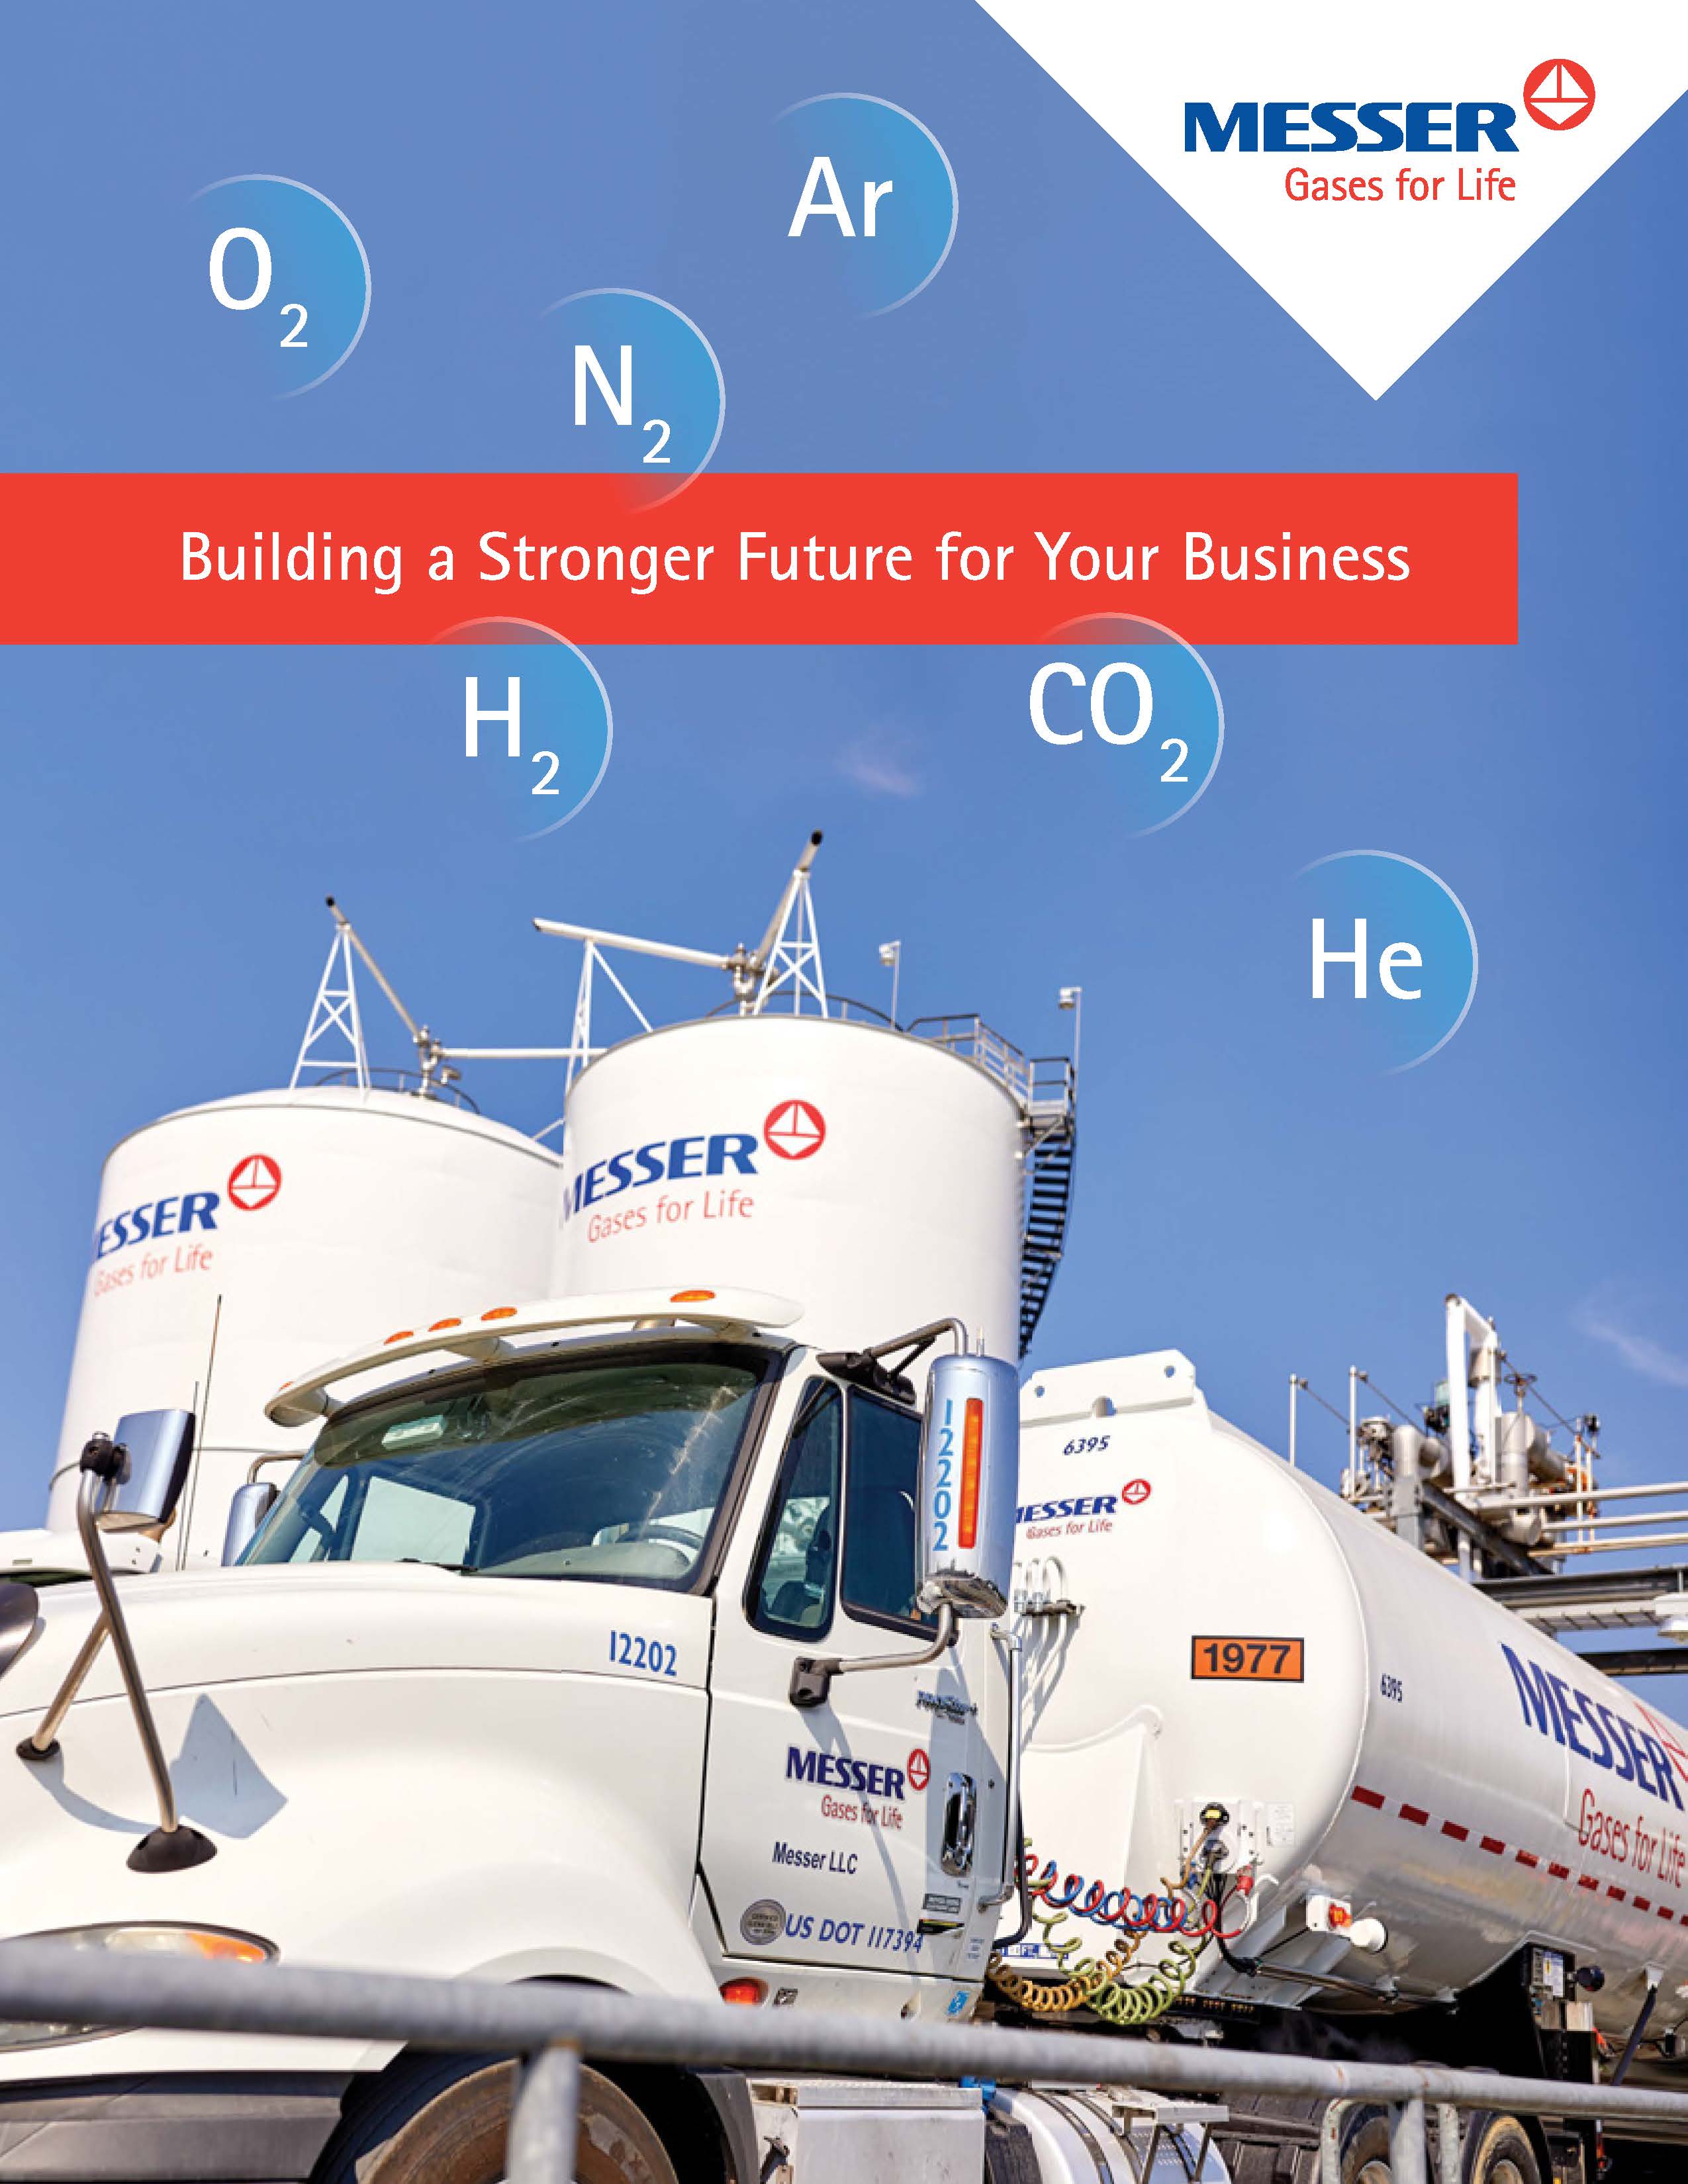 Building a Stronger Future for Your Business